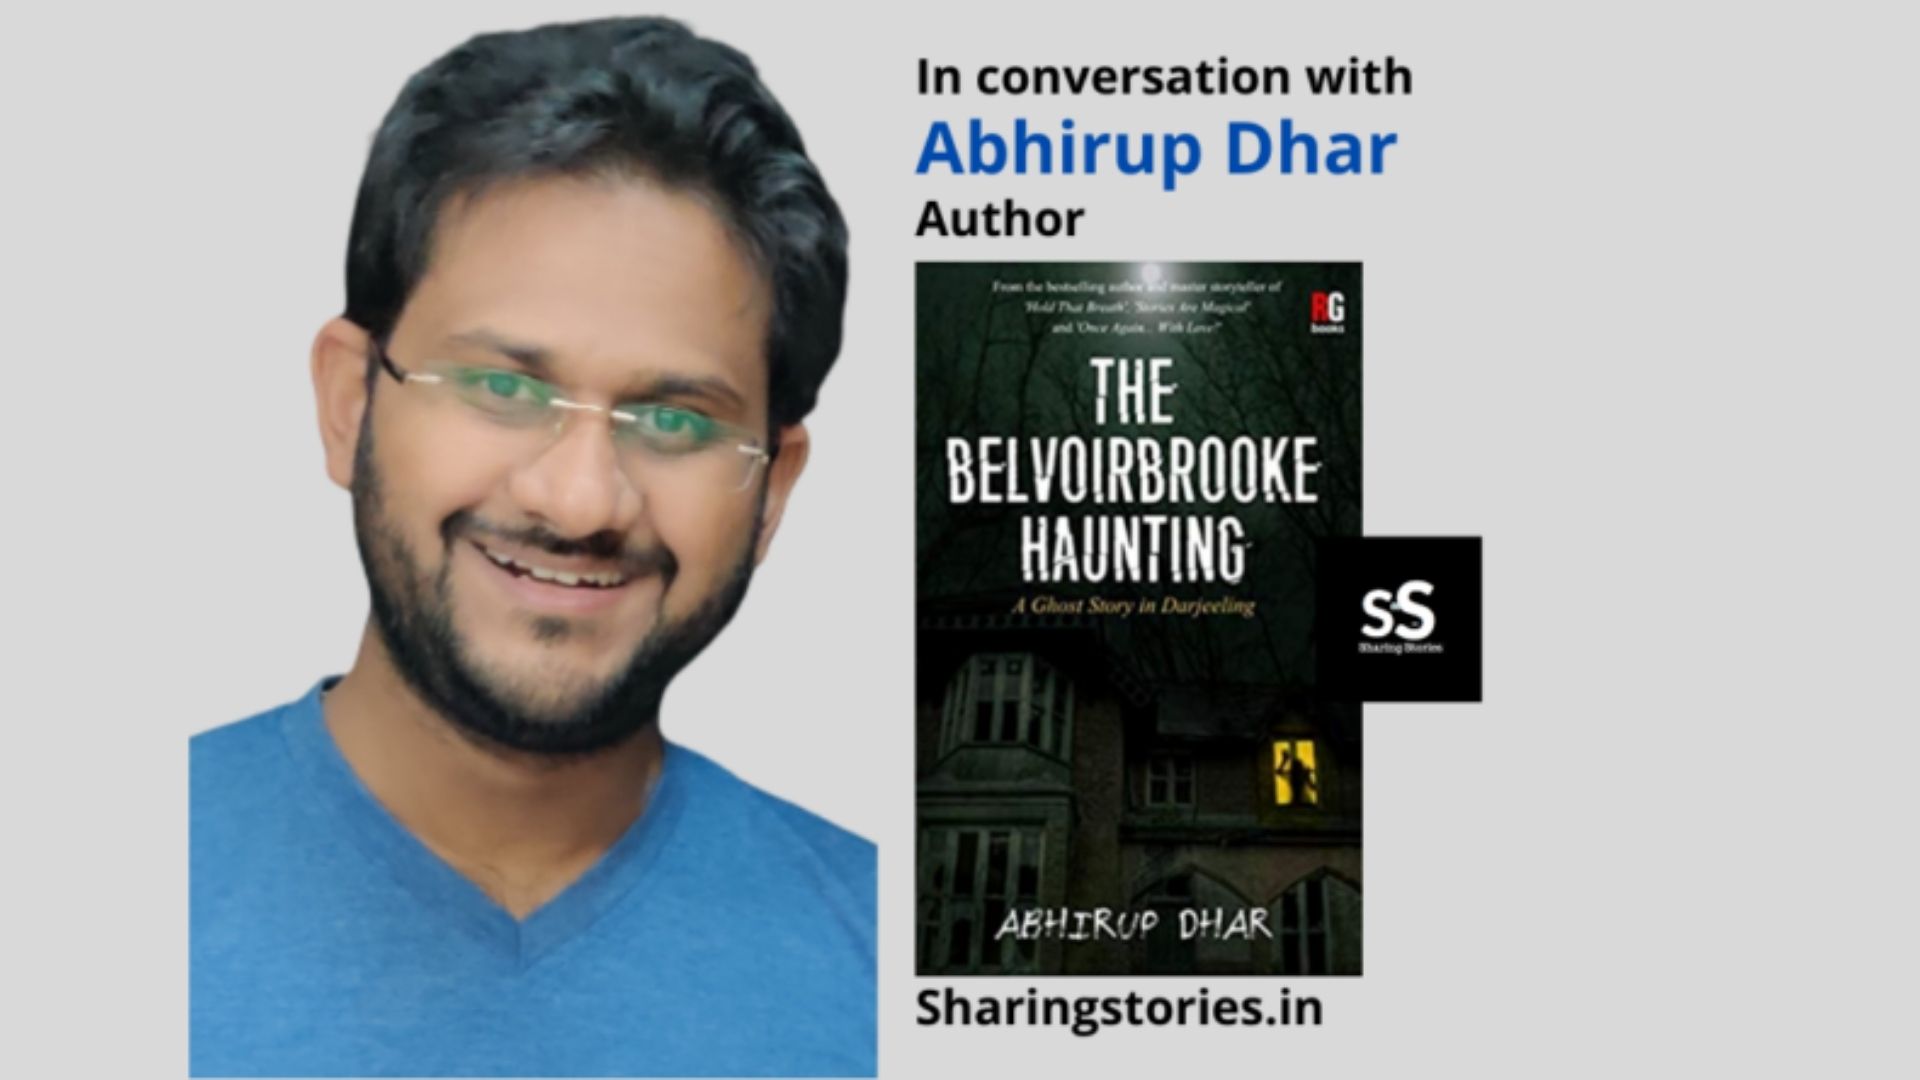 The Belvoirbrooke Haunting by Abhirup Dhar